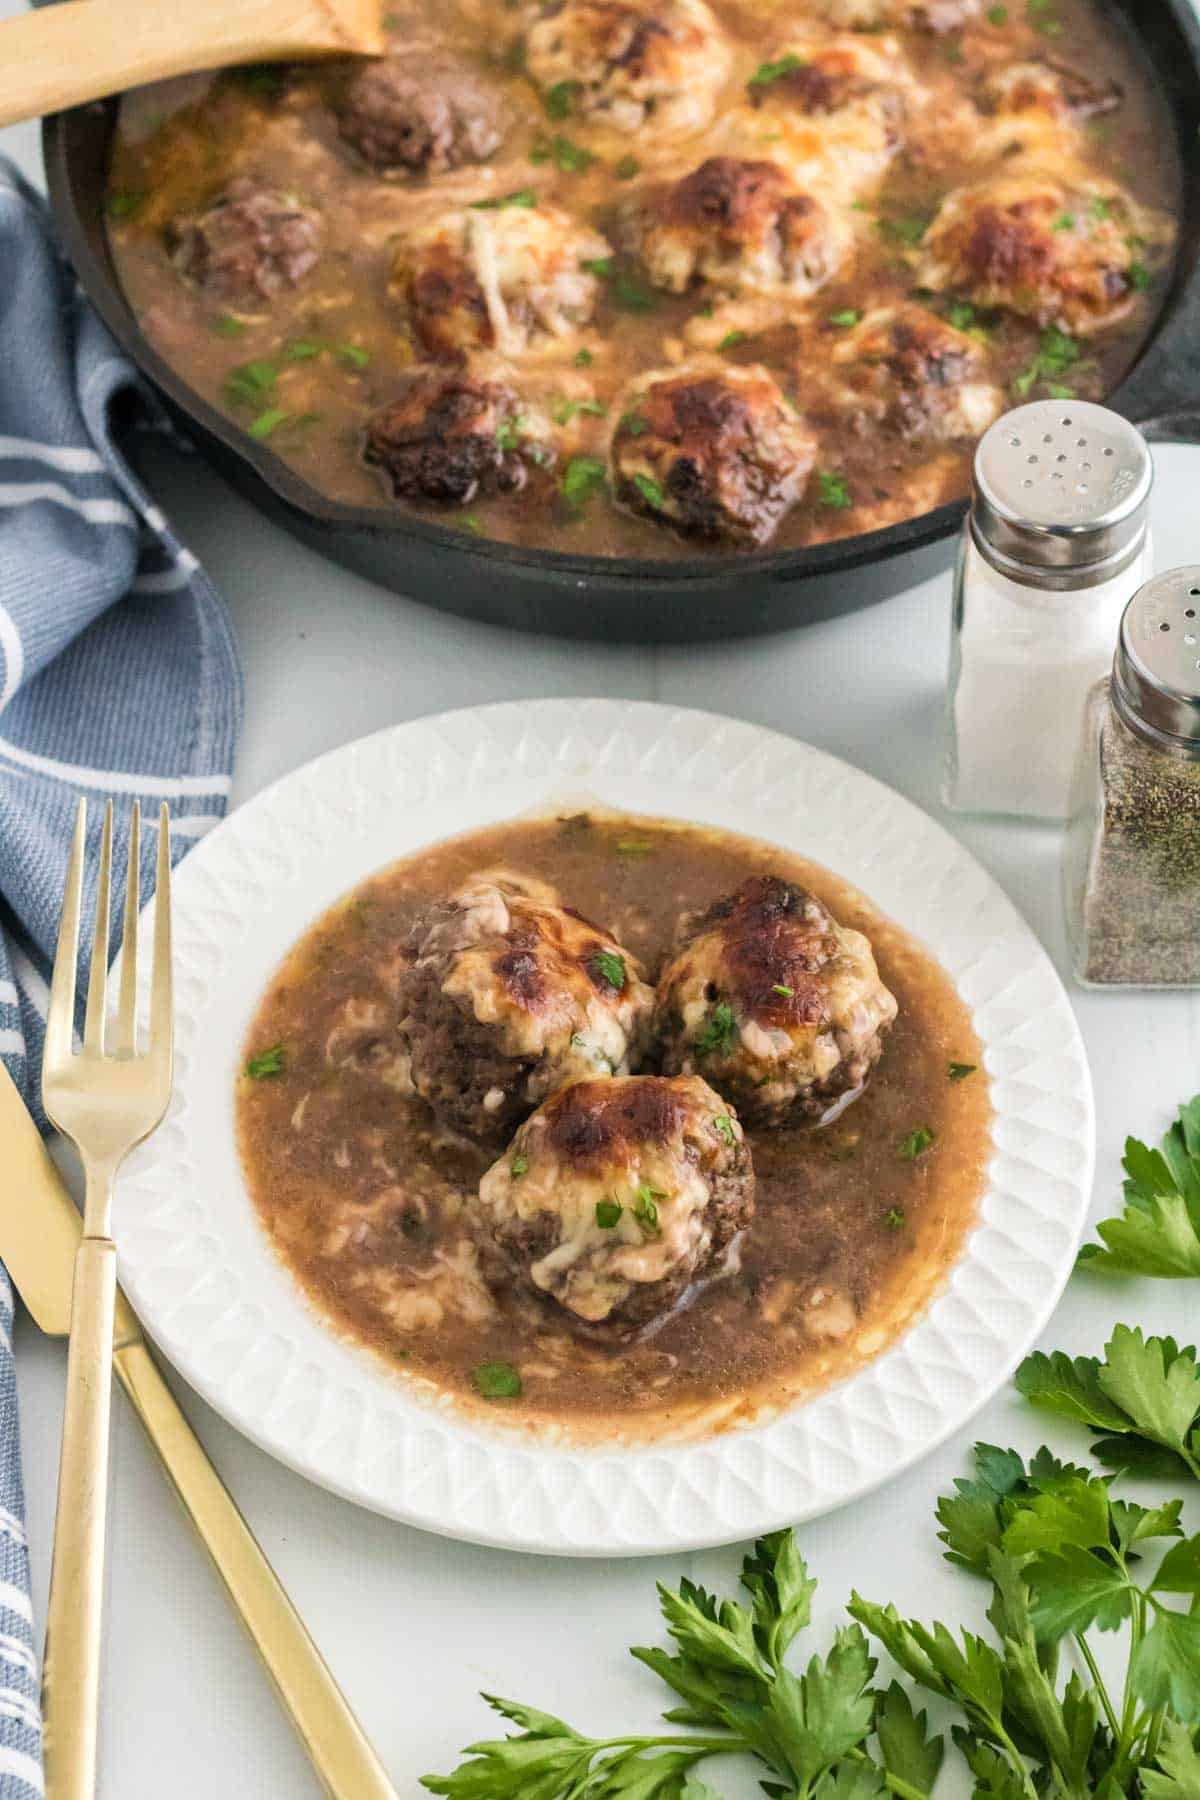 French onion meatballs in gravy on a plate.